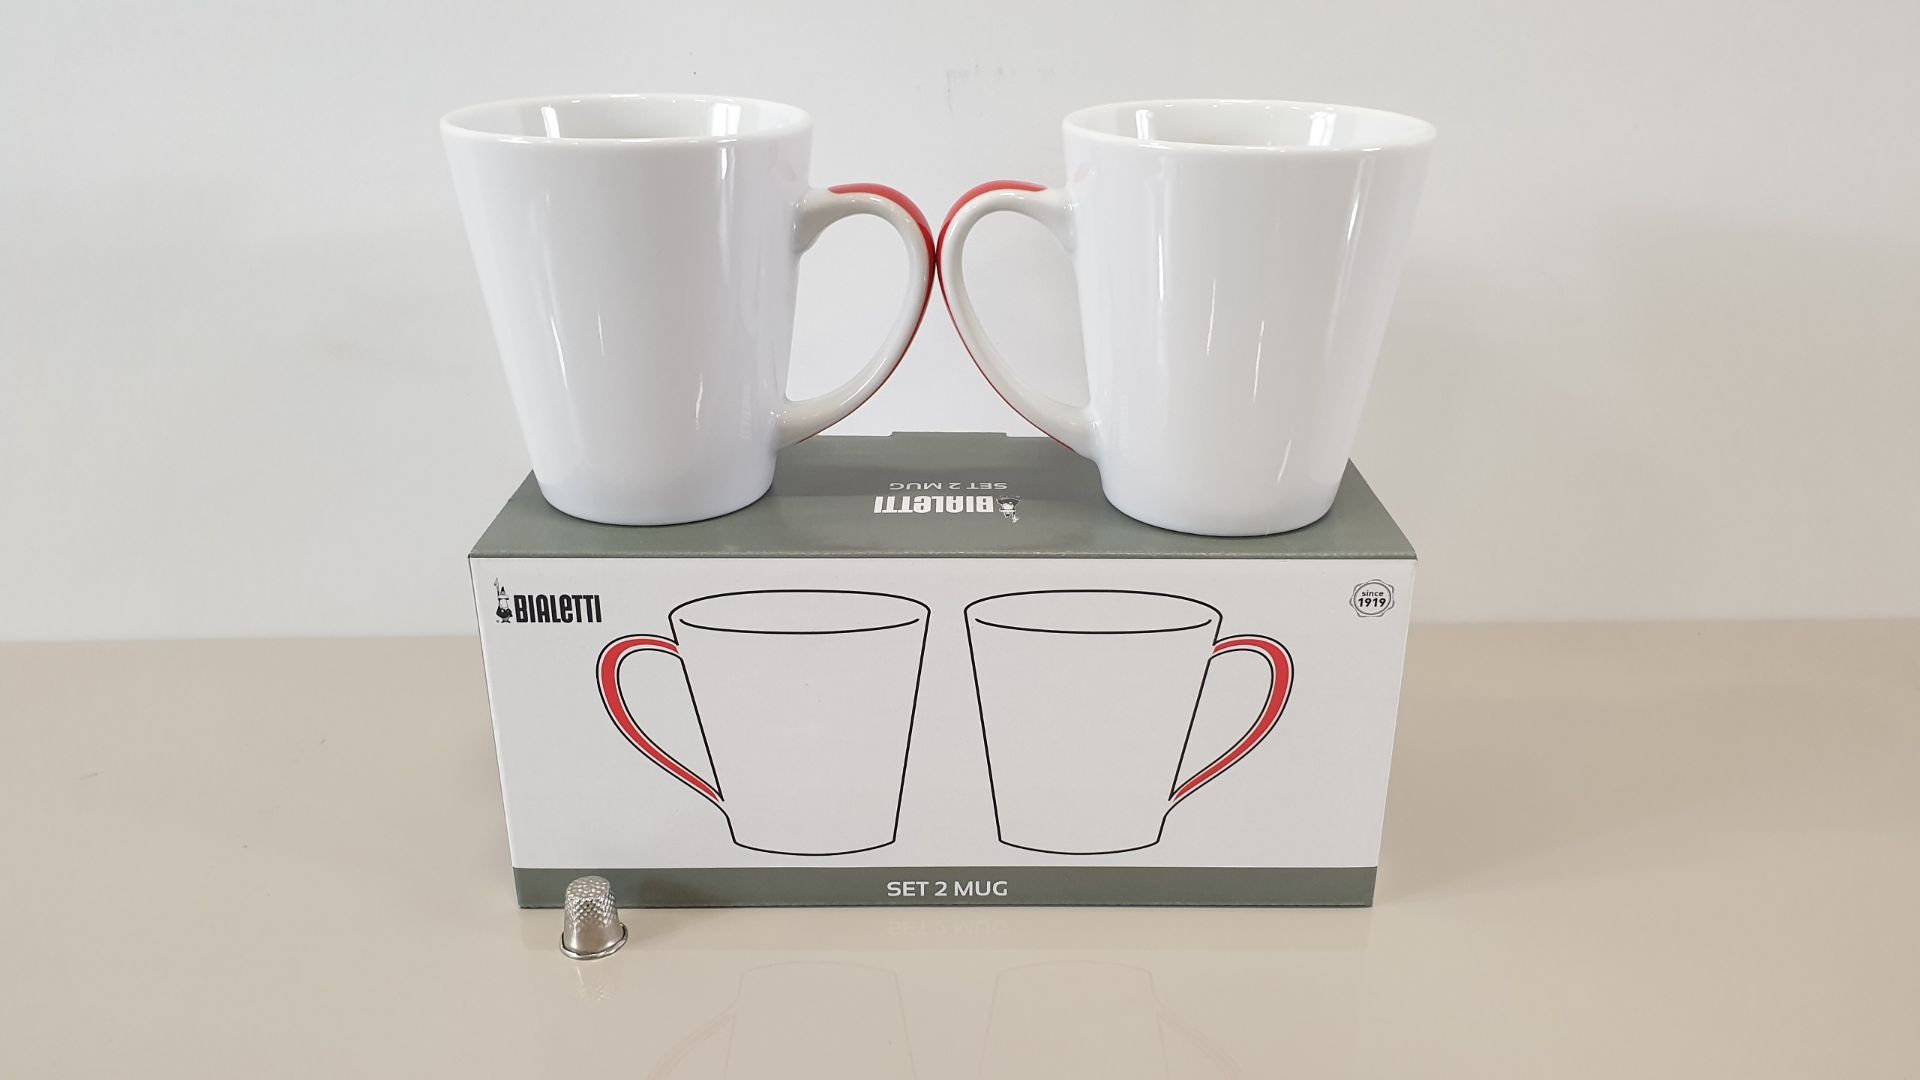 12 X SETS OF 2 BIALETTI CAPPUCCINO MUGS (IN 3 CARTONS)